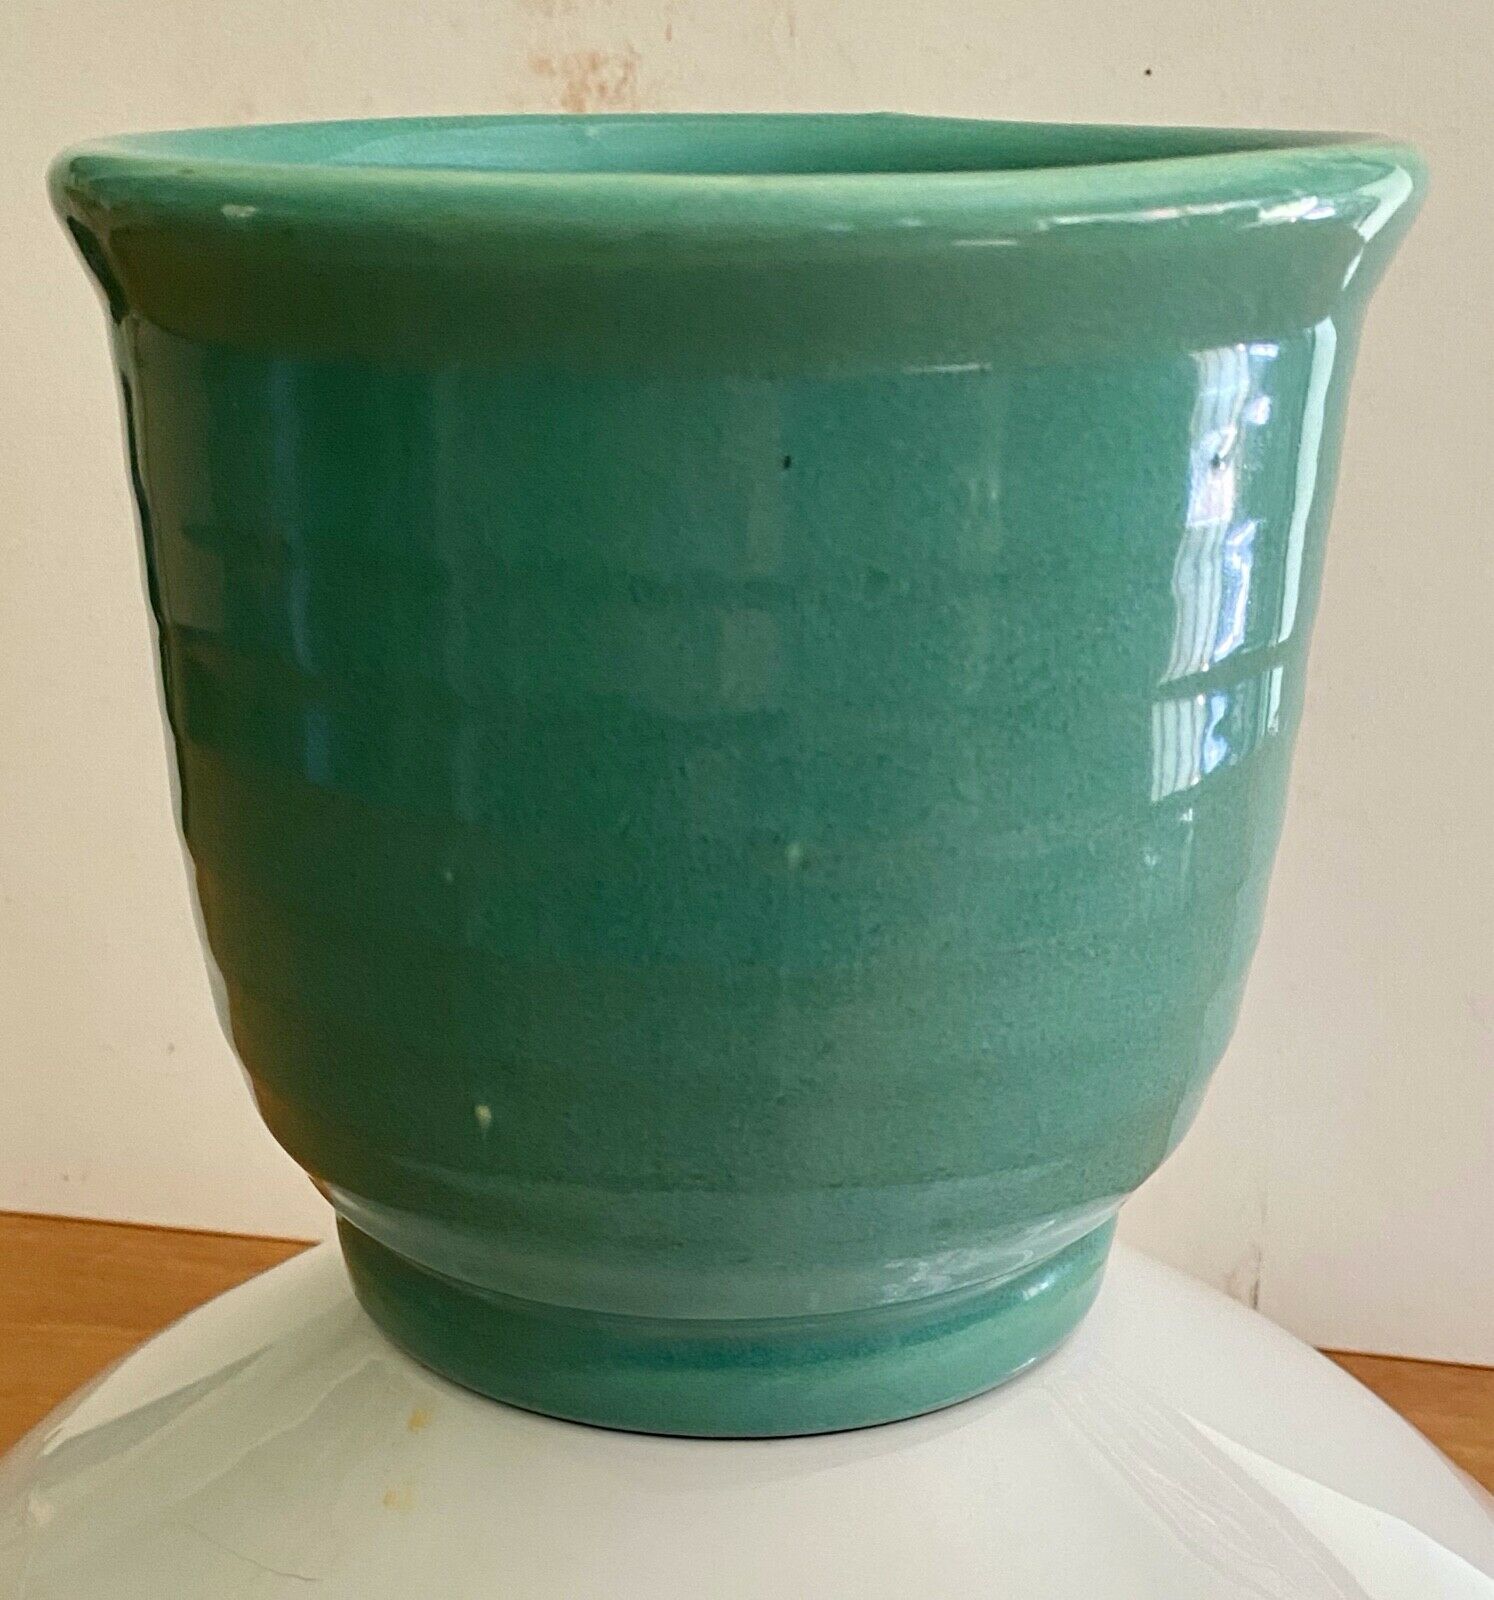 Bauer Ring California Pottery Beater Bowl Turquoise Glaze